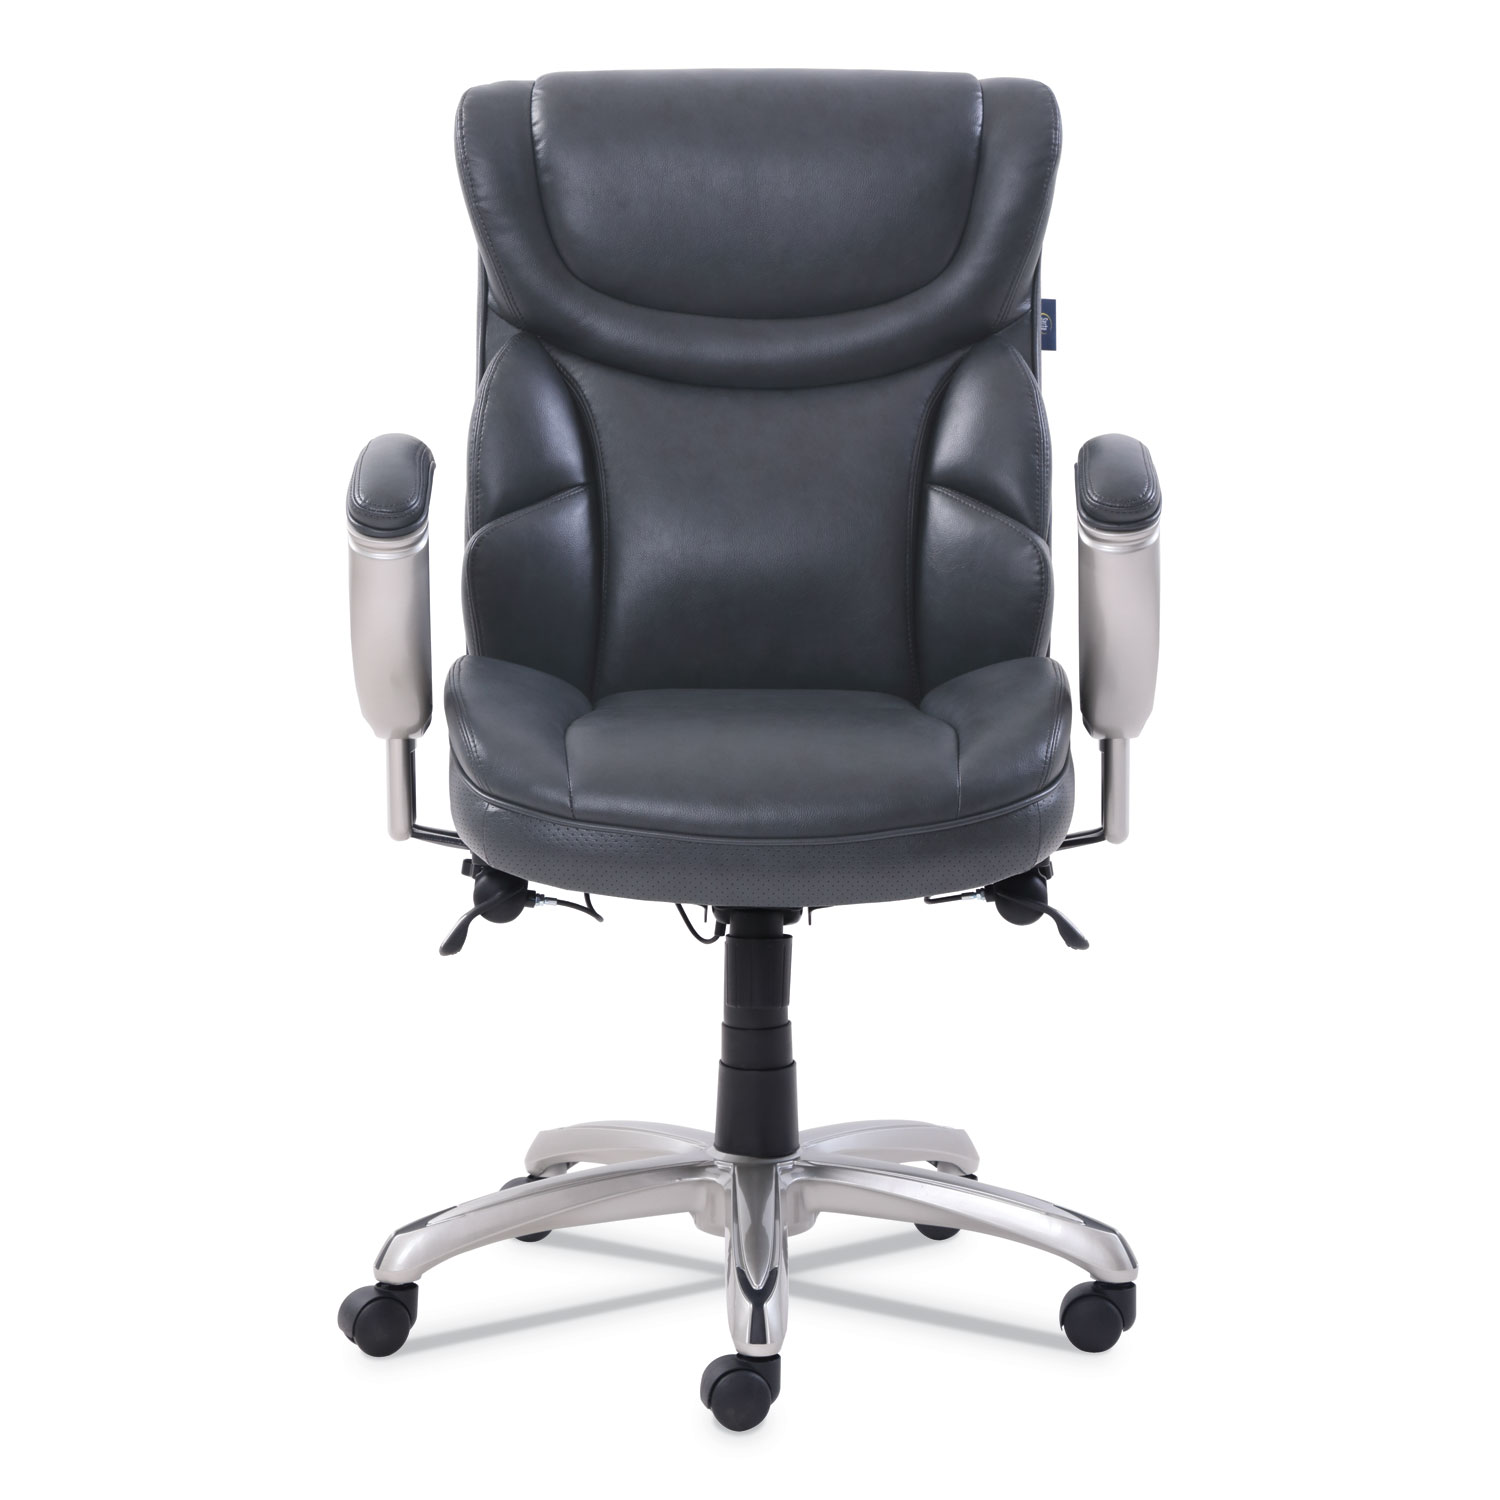 Emerson Task Chair, Supports up to 300 lbs., Gray Seat/Gray Back, Silver Base